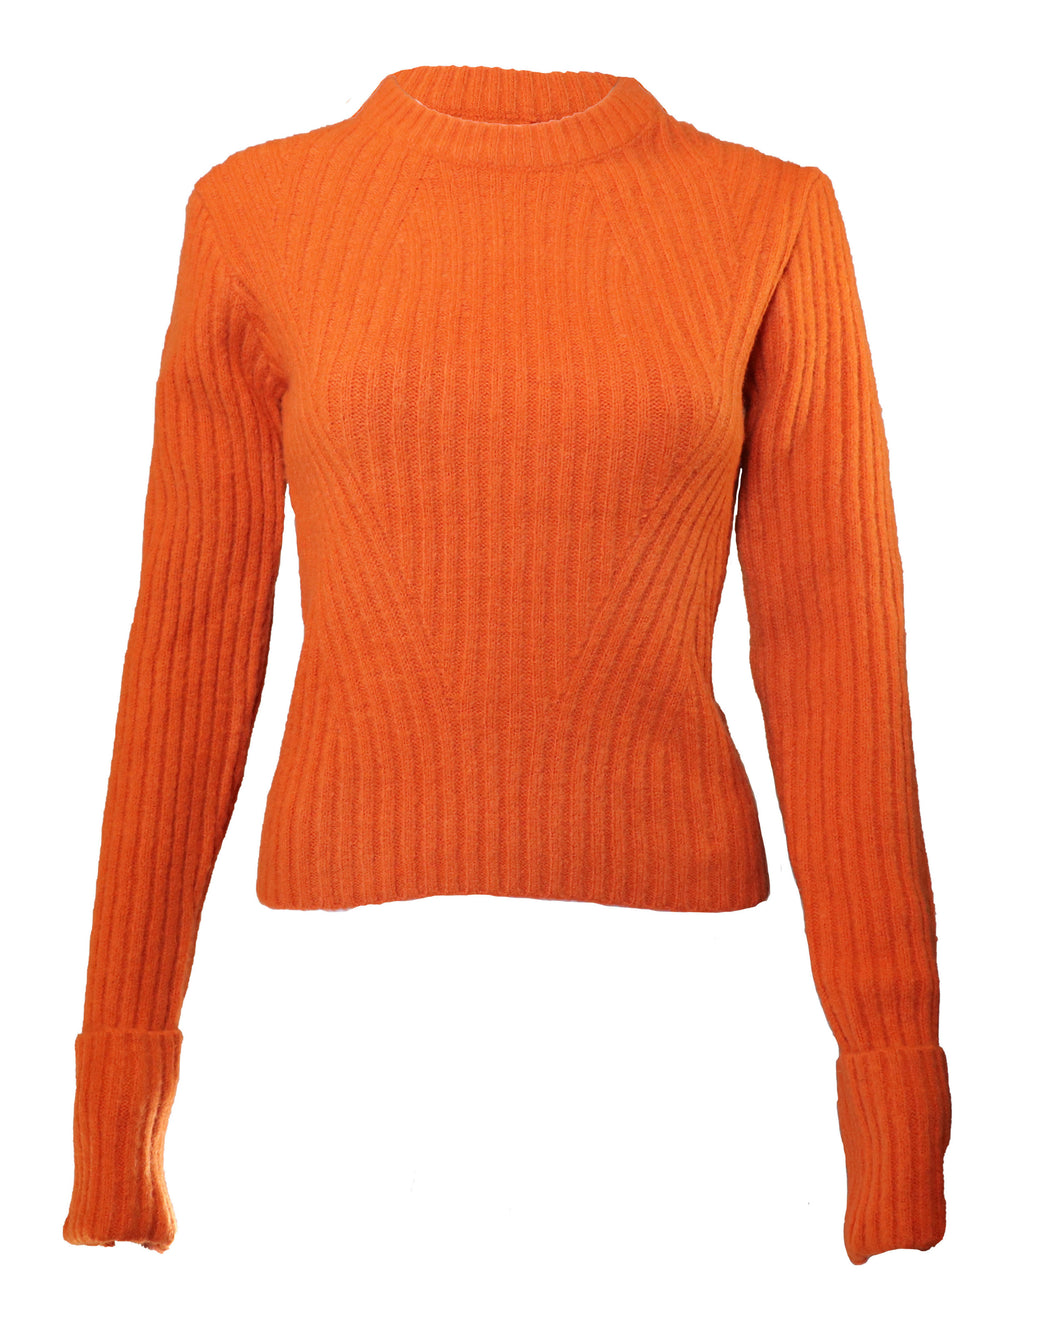 Thick knit sweater (multiple colors)